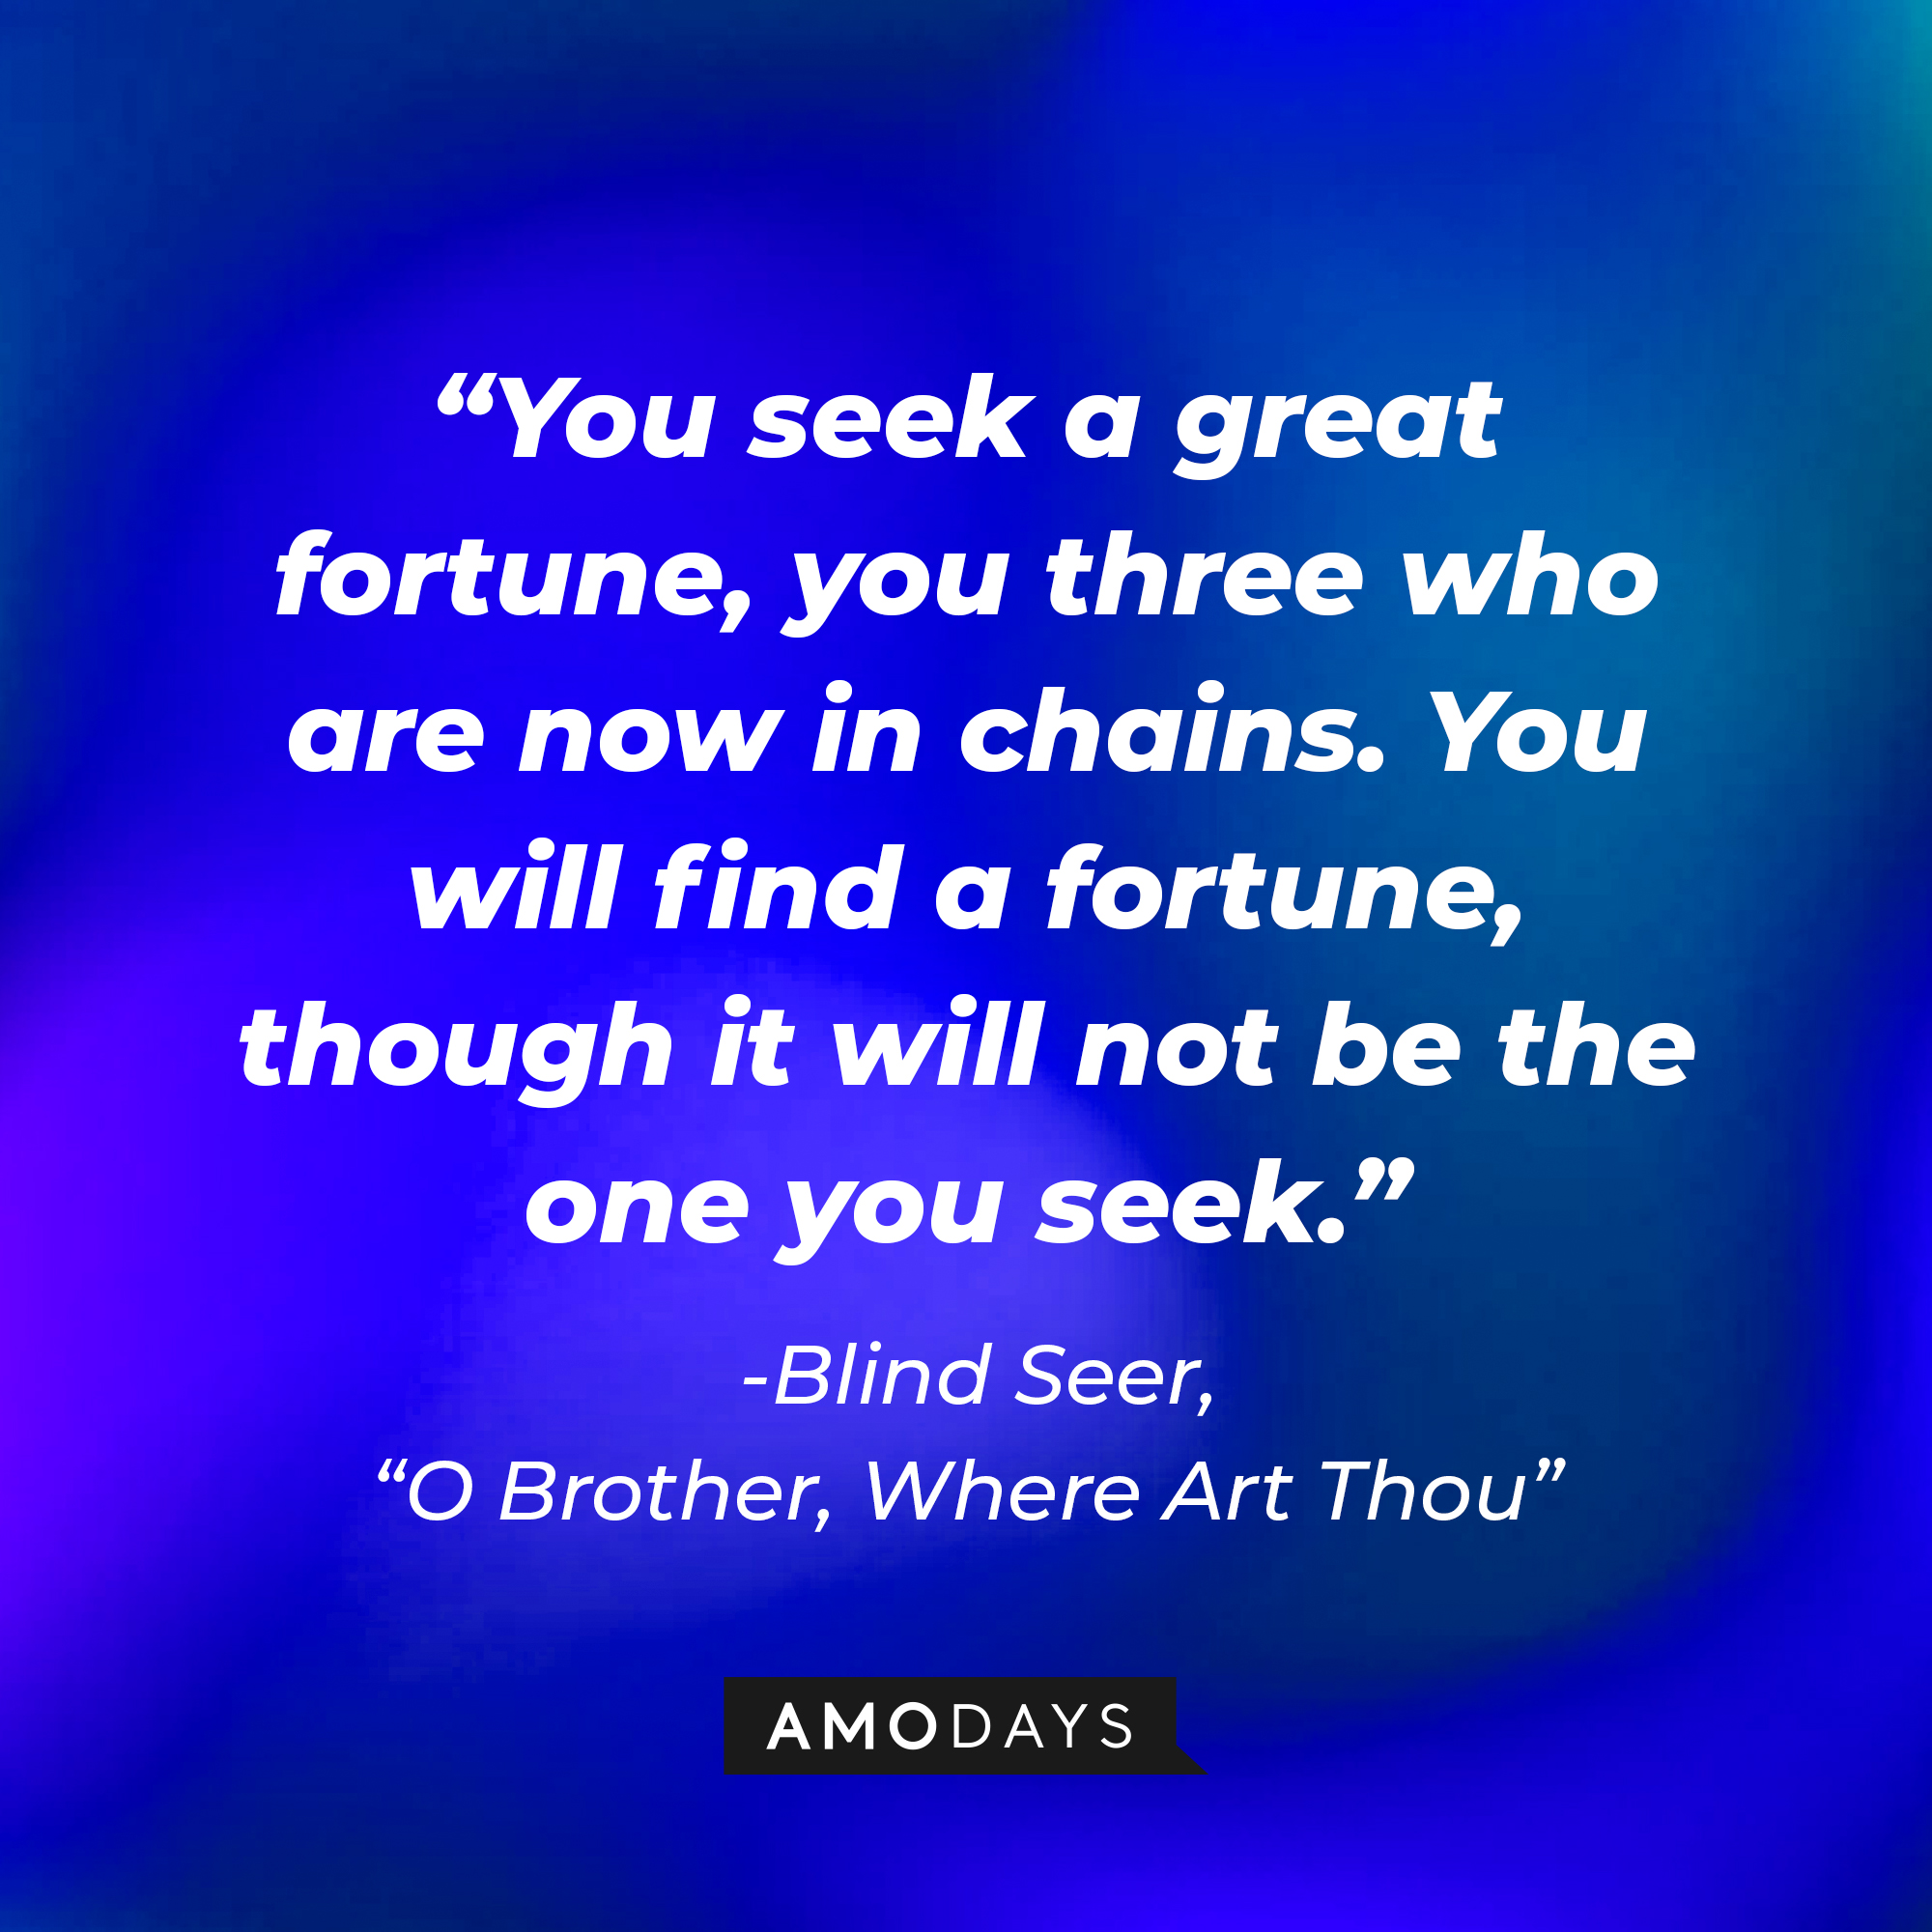 Blind Seer's quote in "O Brother, Where Art Thou:" "You seek a great fortune, you three who are now in chains. You will find a fortune, though it will not be the one you seek." | Source: AmoDays